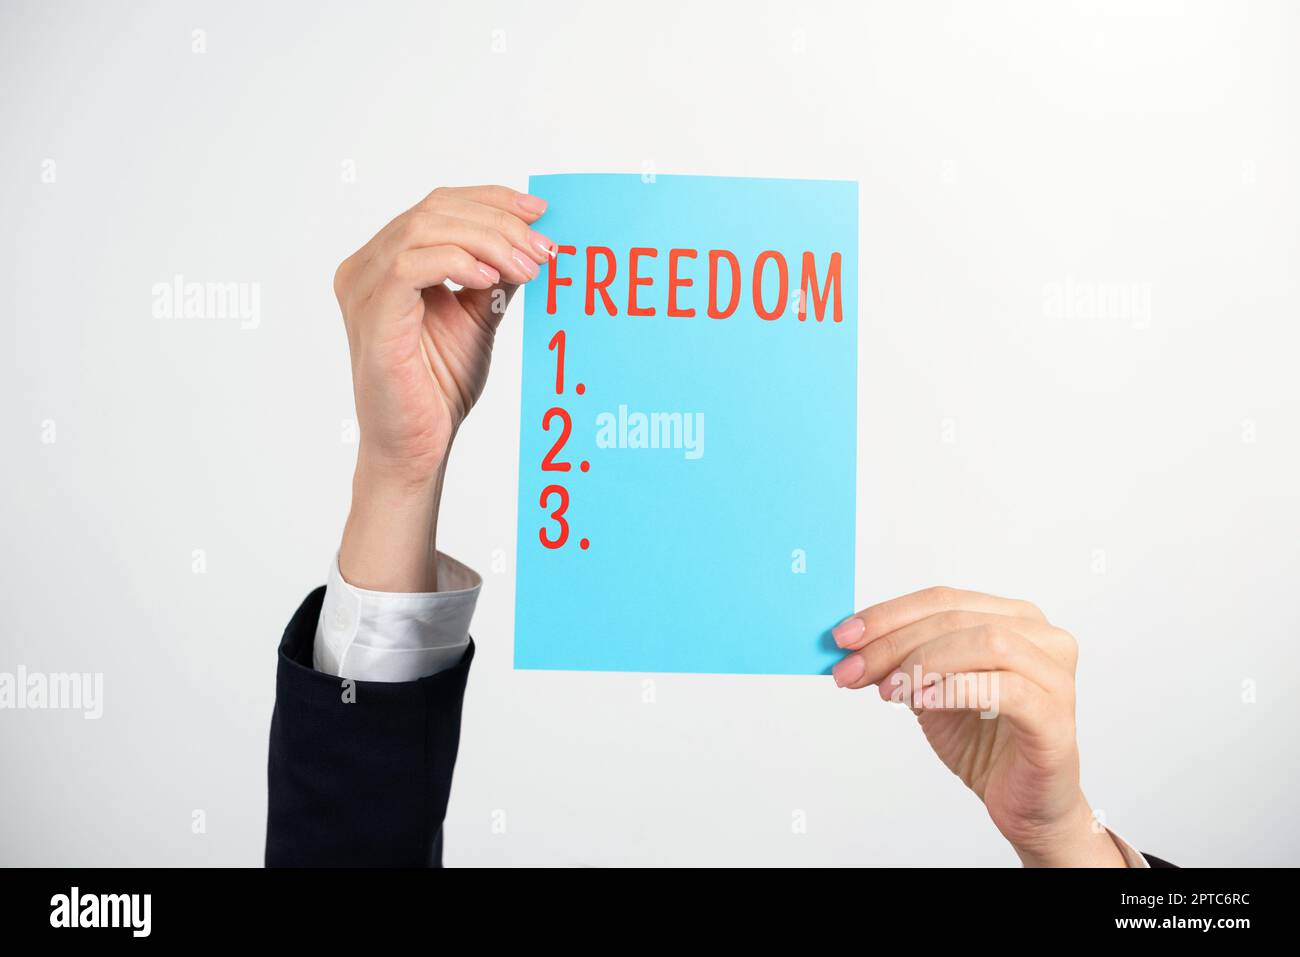 Text sign showing Freedom, Business showcase power or right to act speak or think as one wants without hindrance Businesswoman Holding Note With Impor Stock Photo